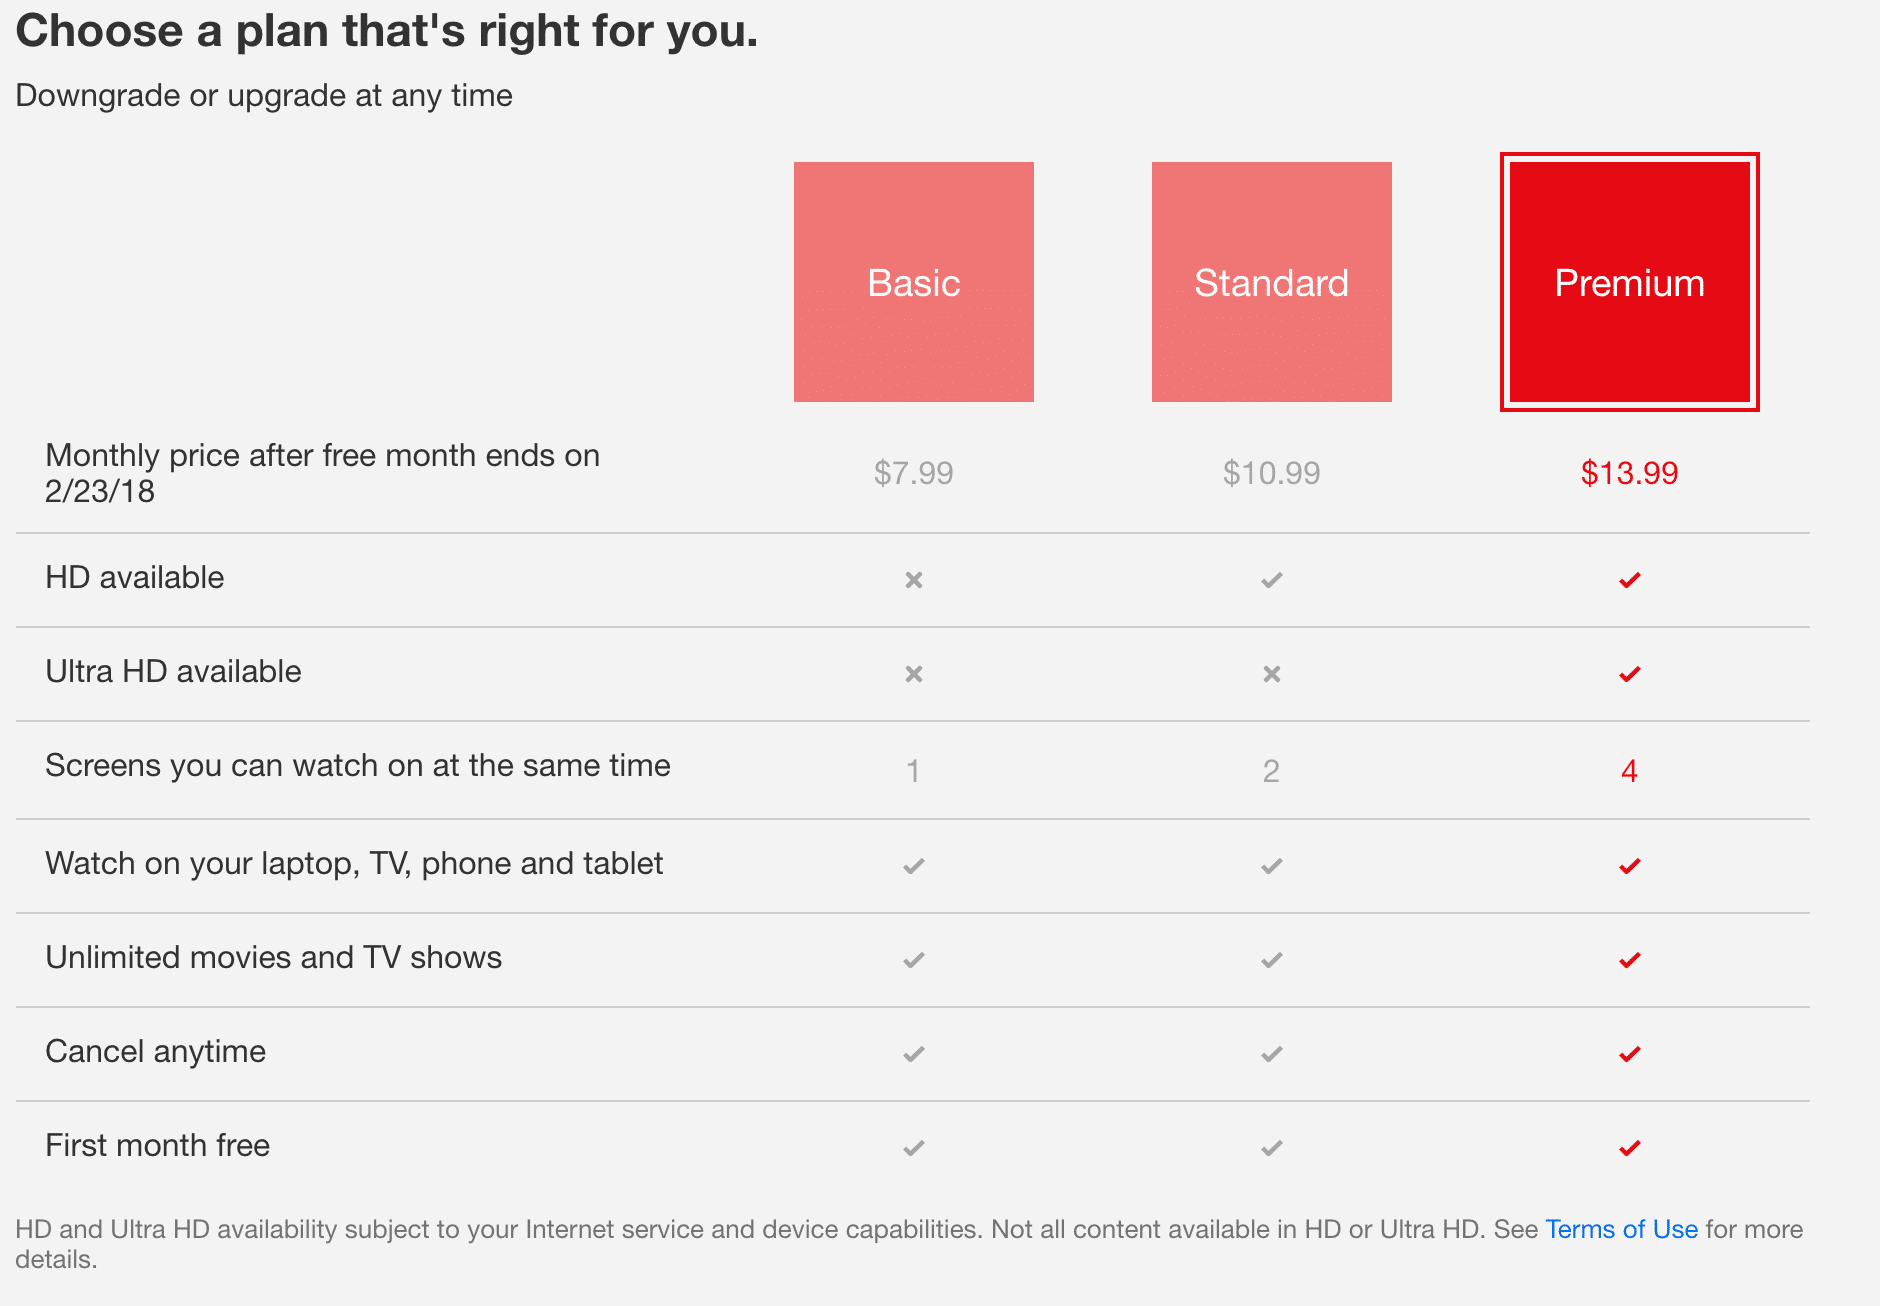 Netflix Quietly Perfected Their Pricing. Here’s What You Can Learn